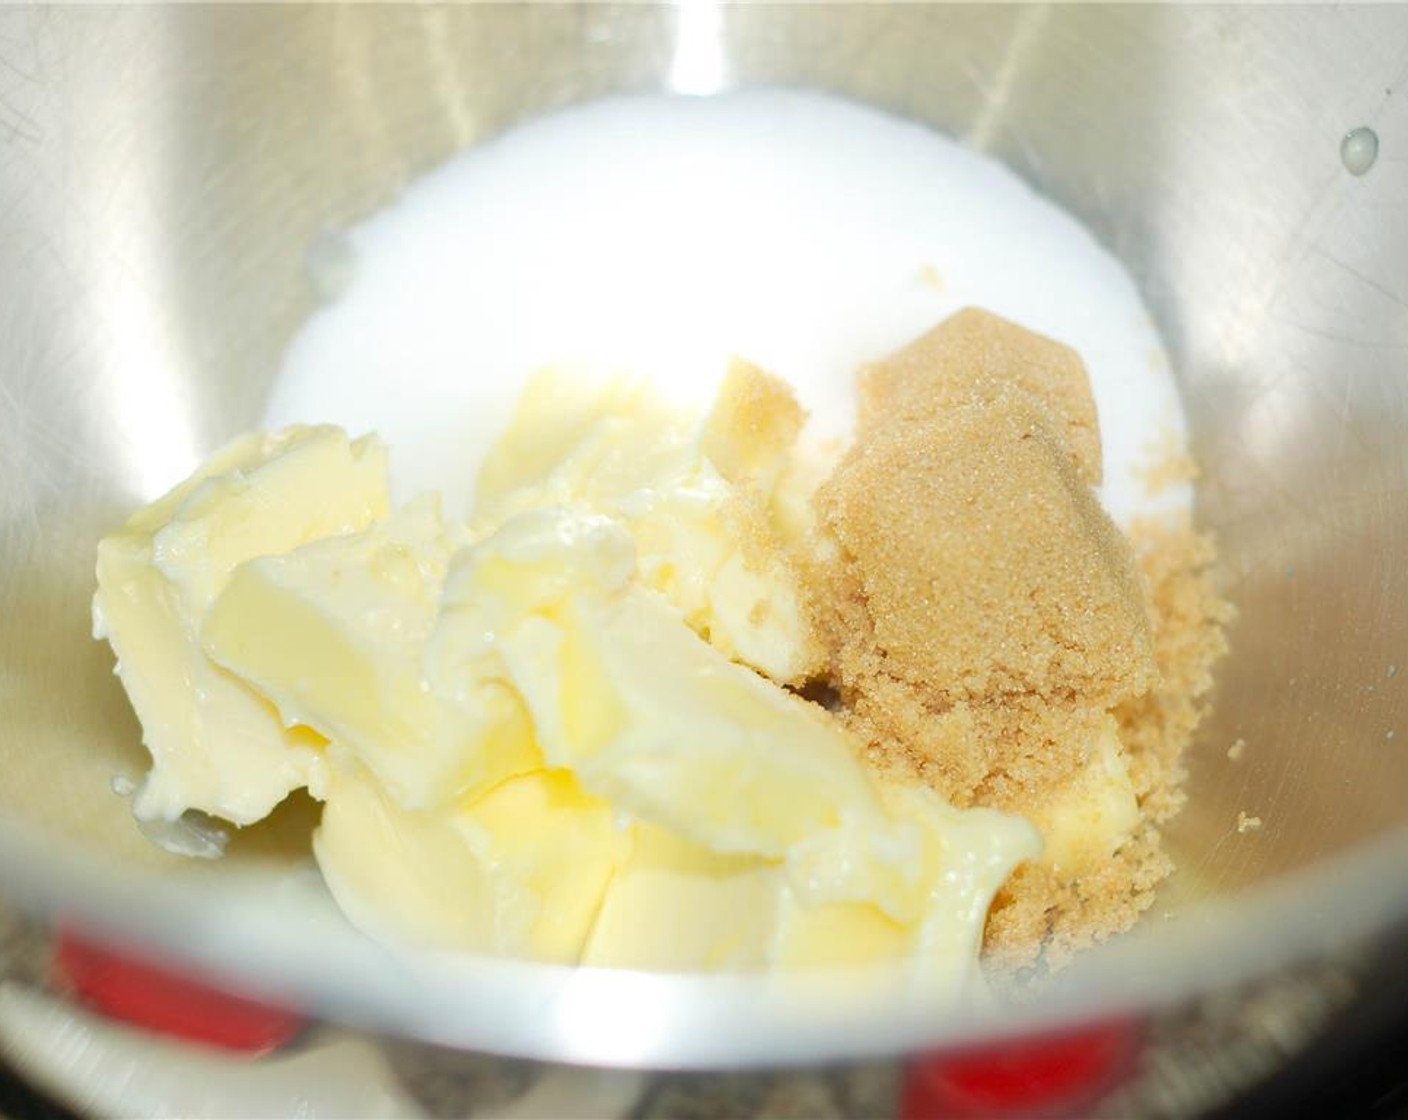 step 1 Bring Unsalted Butter (2/3 cup) to room temperature, then in a stand mixer, cream together the butter, Brown Sugar (2 Tbsp) and Granulated Sugar (1/4 cup). Add Biscoff Cookie Spread (1/4 cup) and Vanilla Extract (1/2 tsp). Mix on low